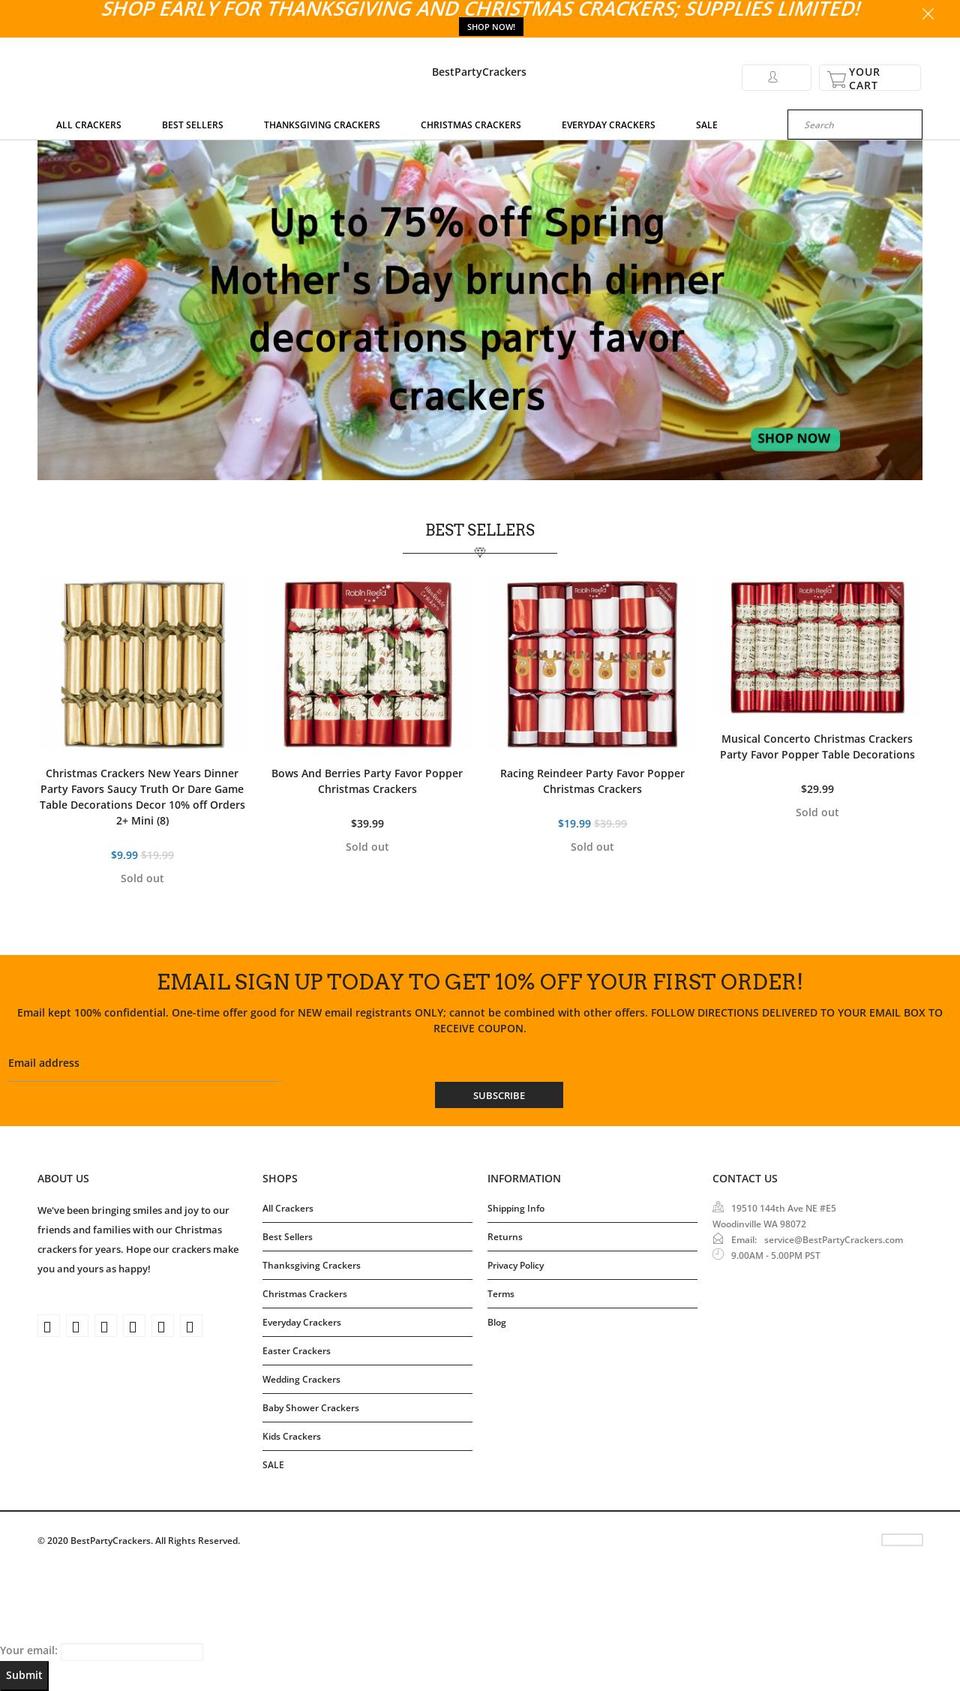 FASTEST Shopify theme site example bestpartycrackers.com